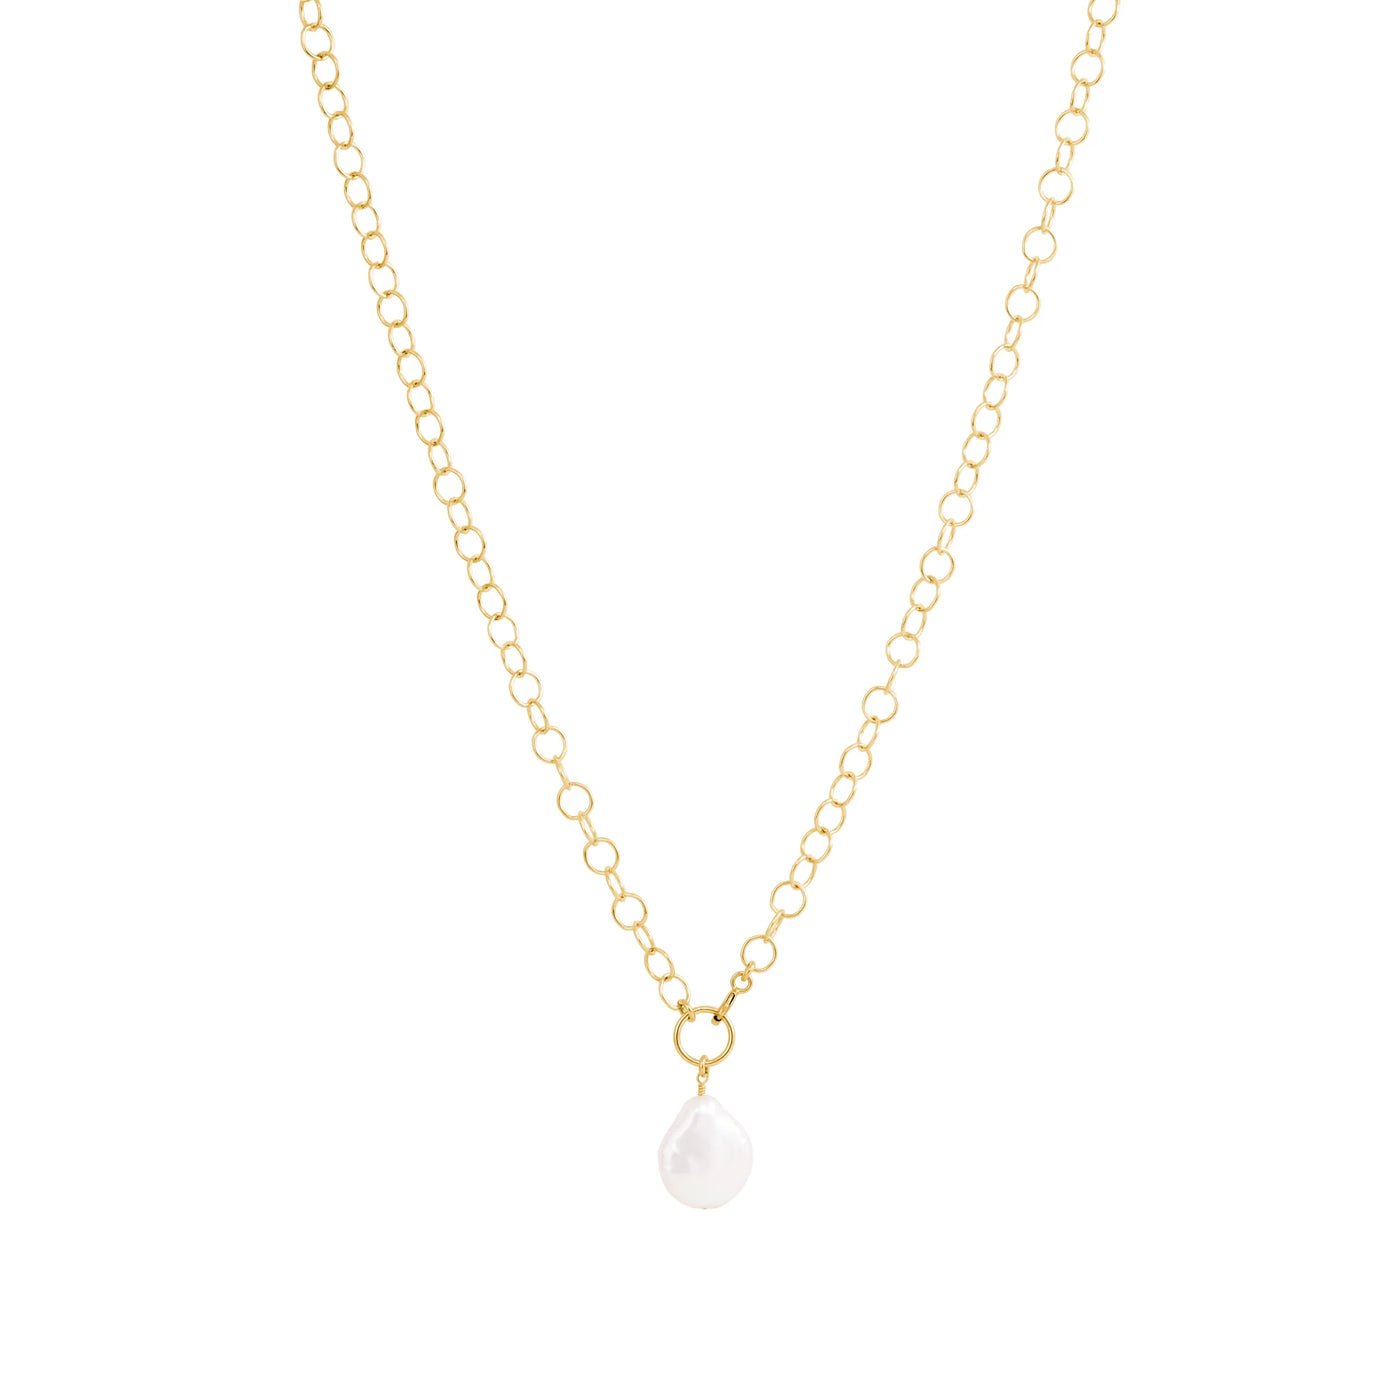 Alana Maria Laurie Necklace, Gold